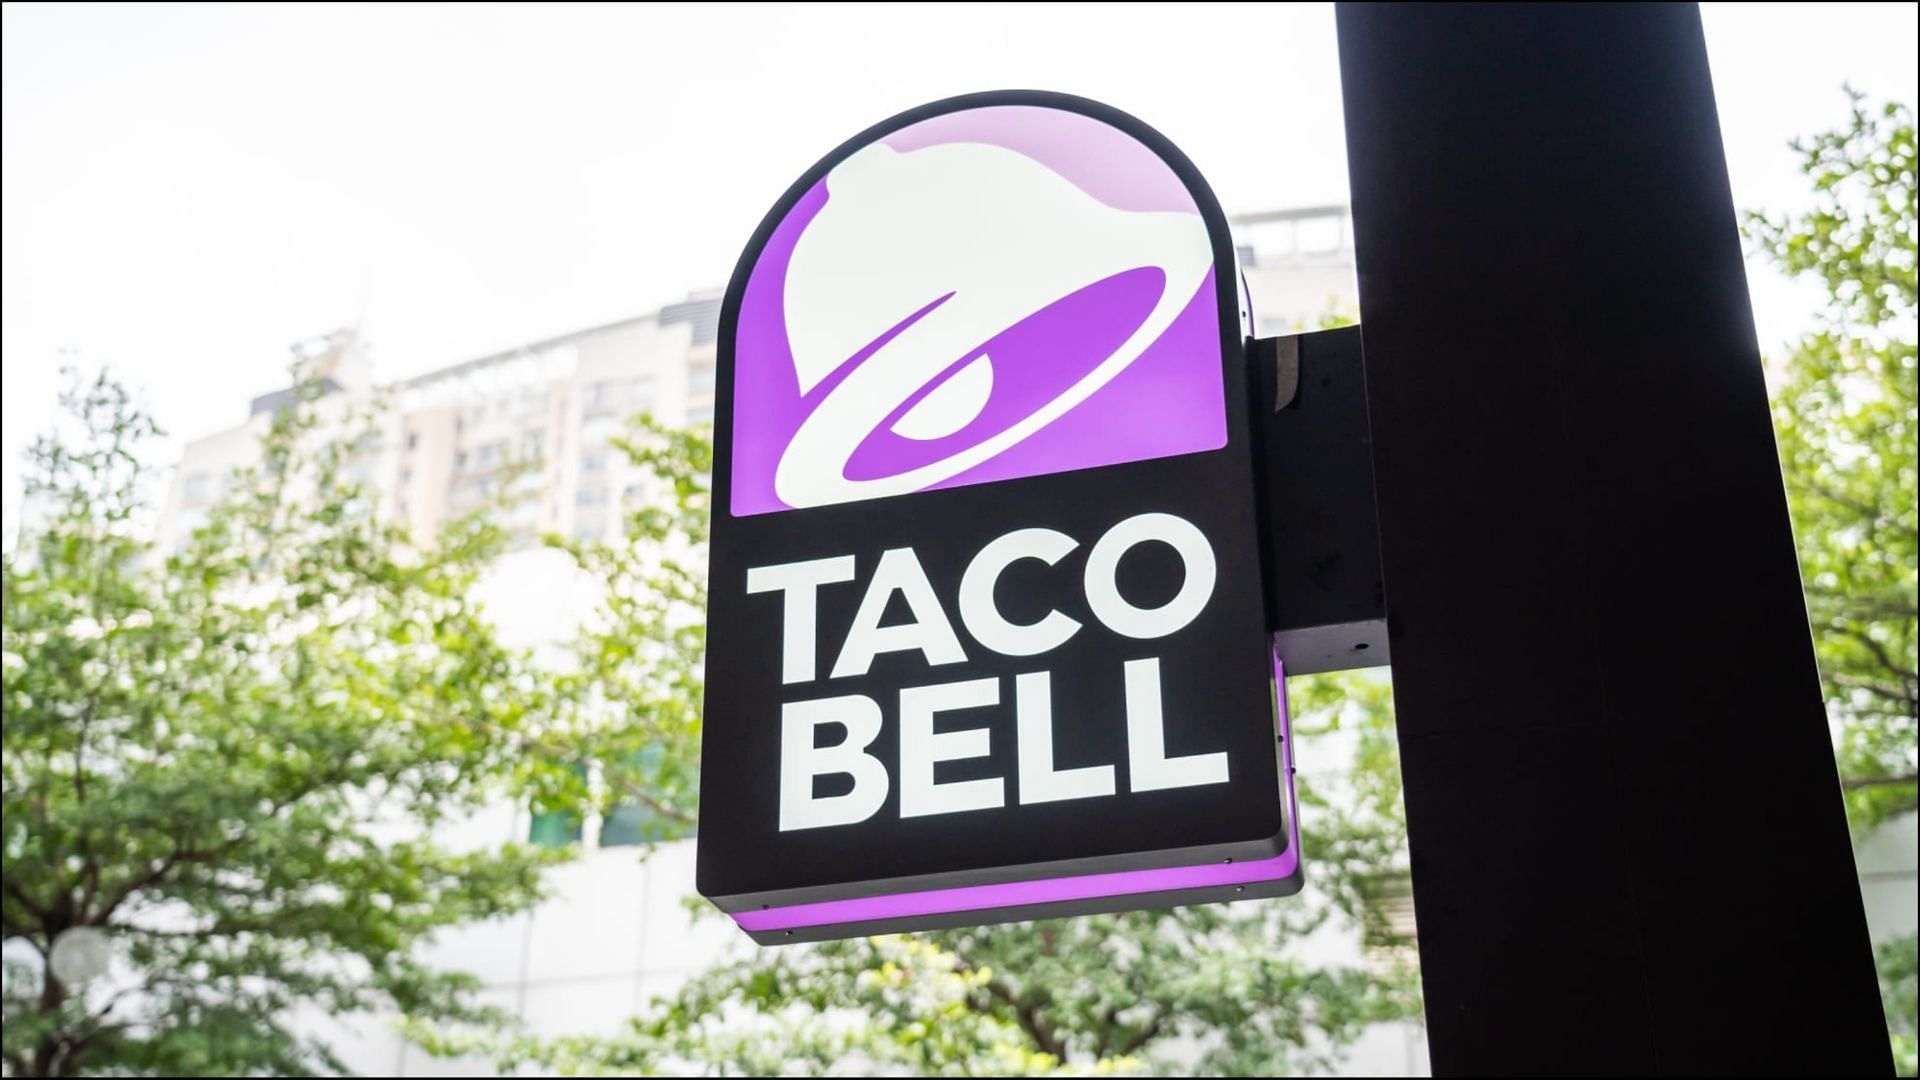 Taco Bell offers a free seasoned Beef Nacho Cheese Doritos Locos Taco every Tuesday until September 5 (Image via Alex Tai / SOPA Images / Getty Images)